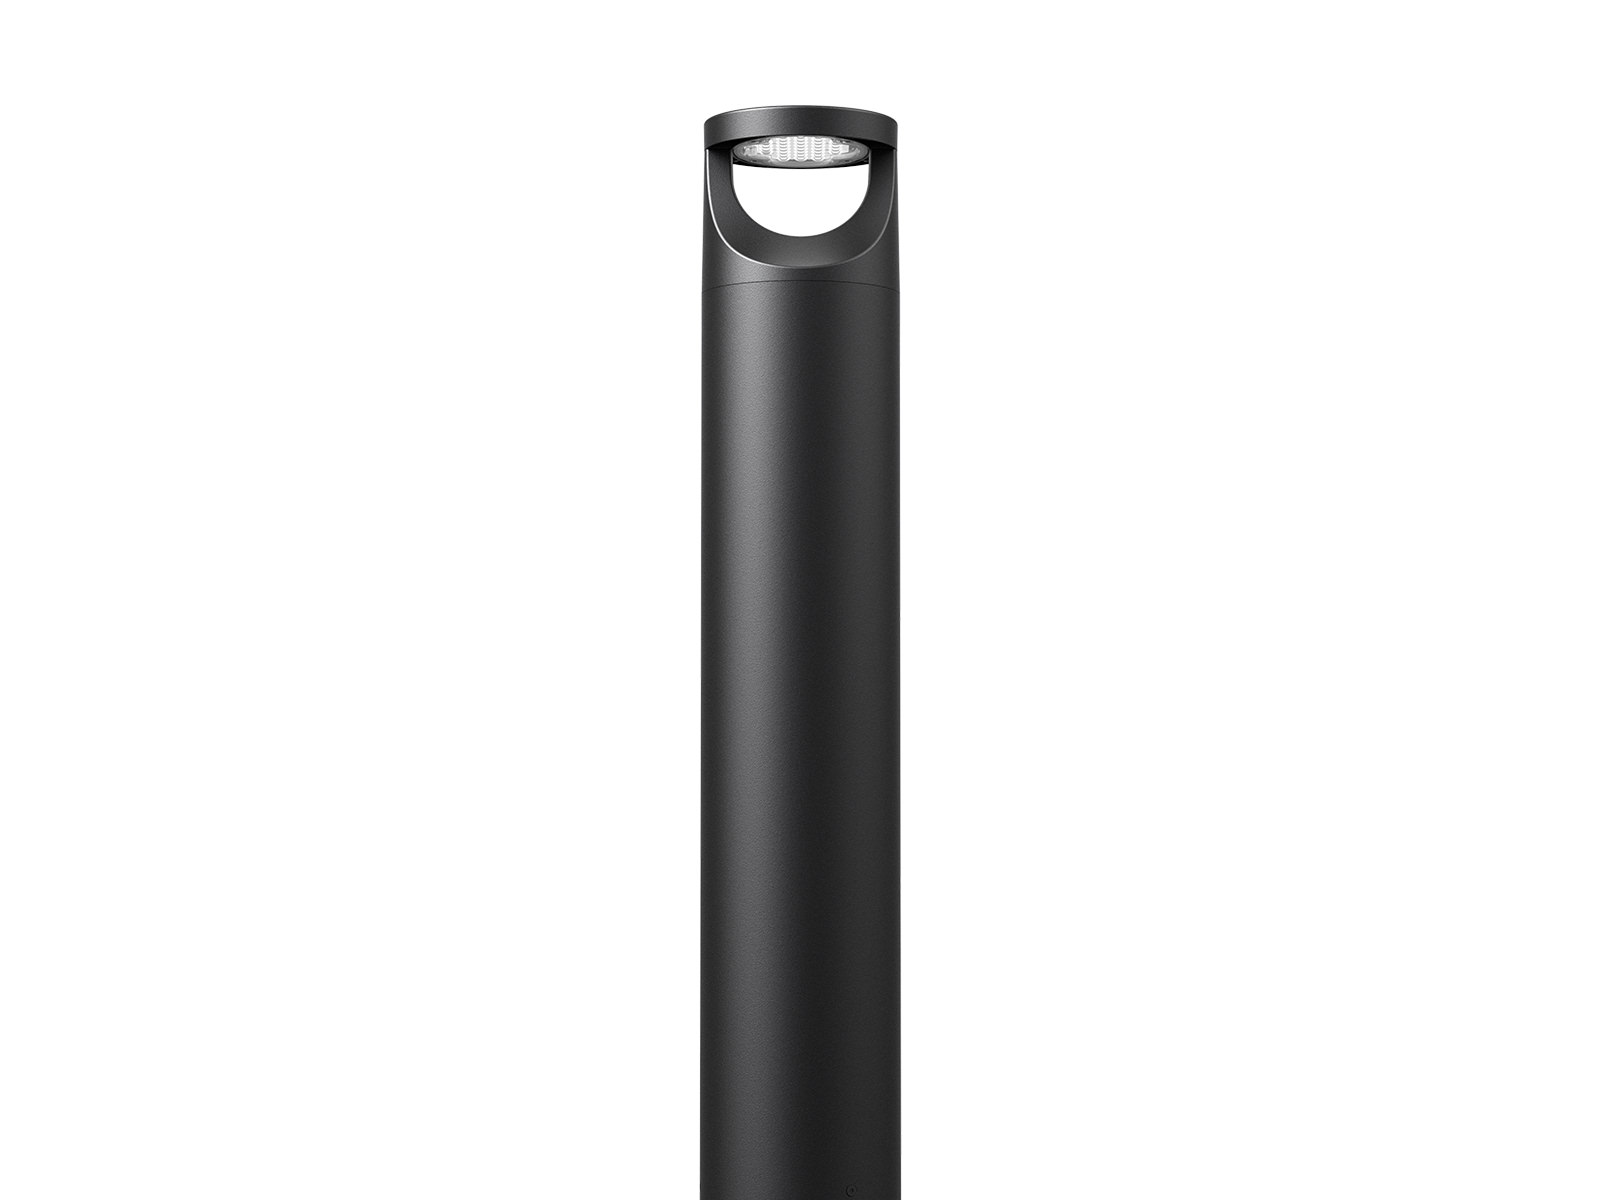 BL01 LED Bollard Light with Architectural and Innovative Design